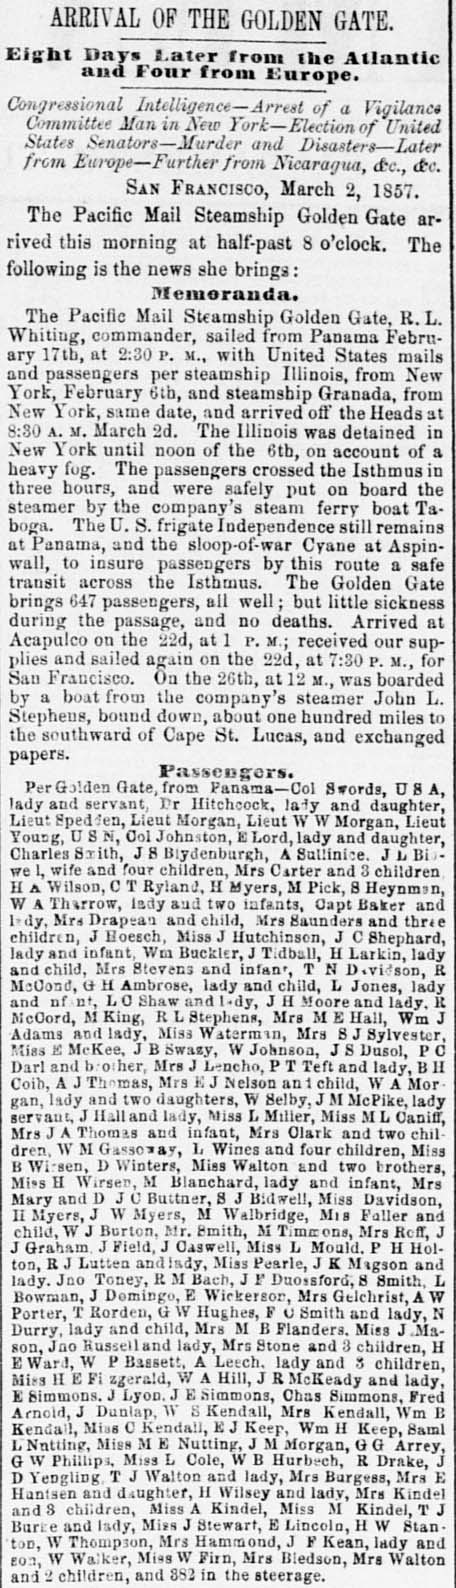 Passengers by the SS Golden Gate, March 3, 1857, Sacramento Daily Union.